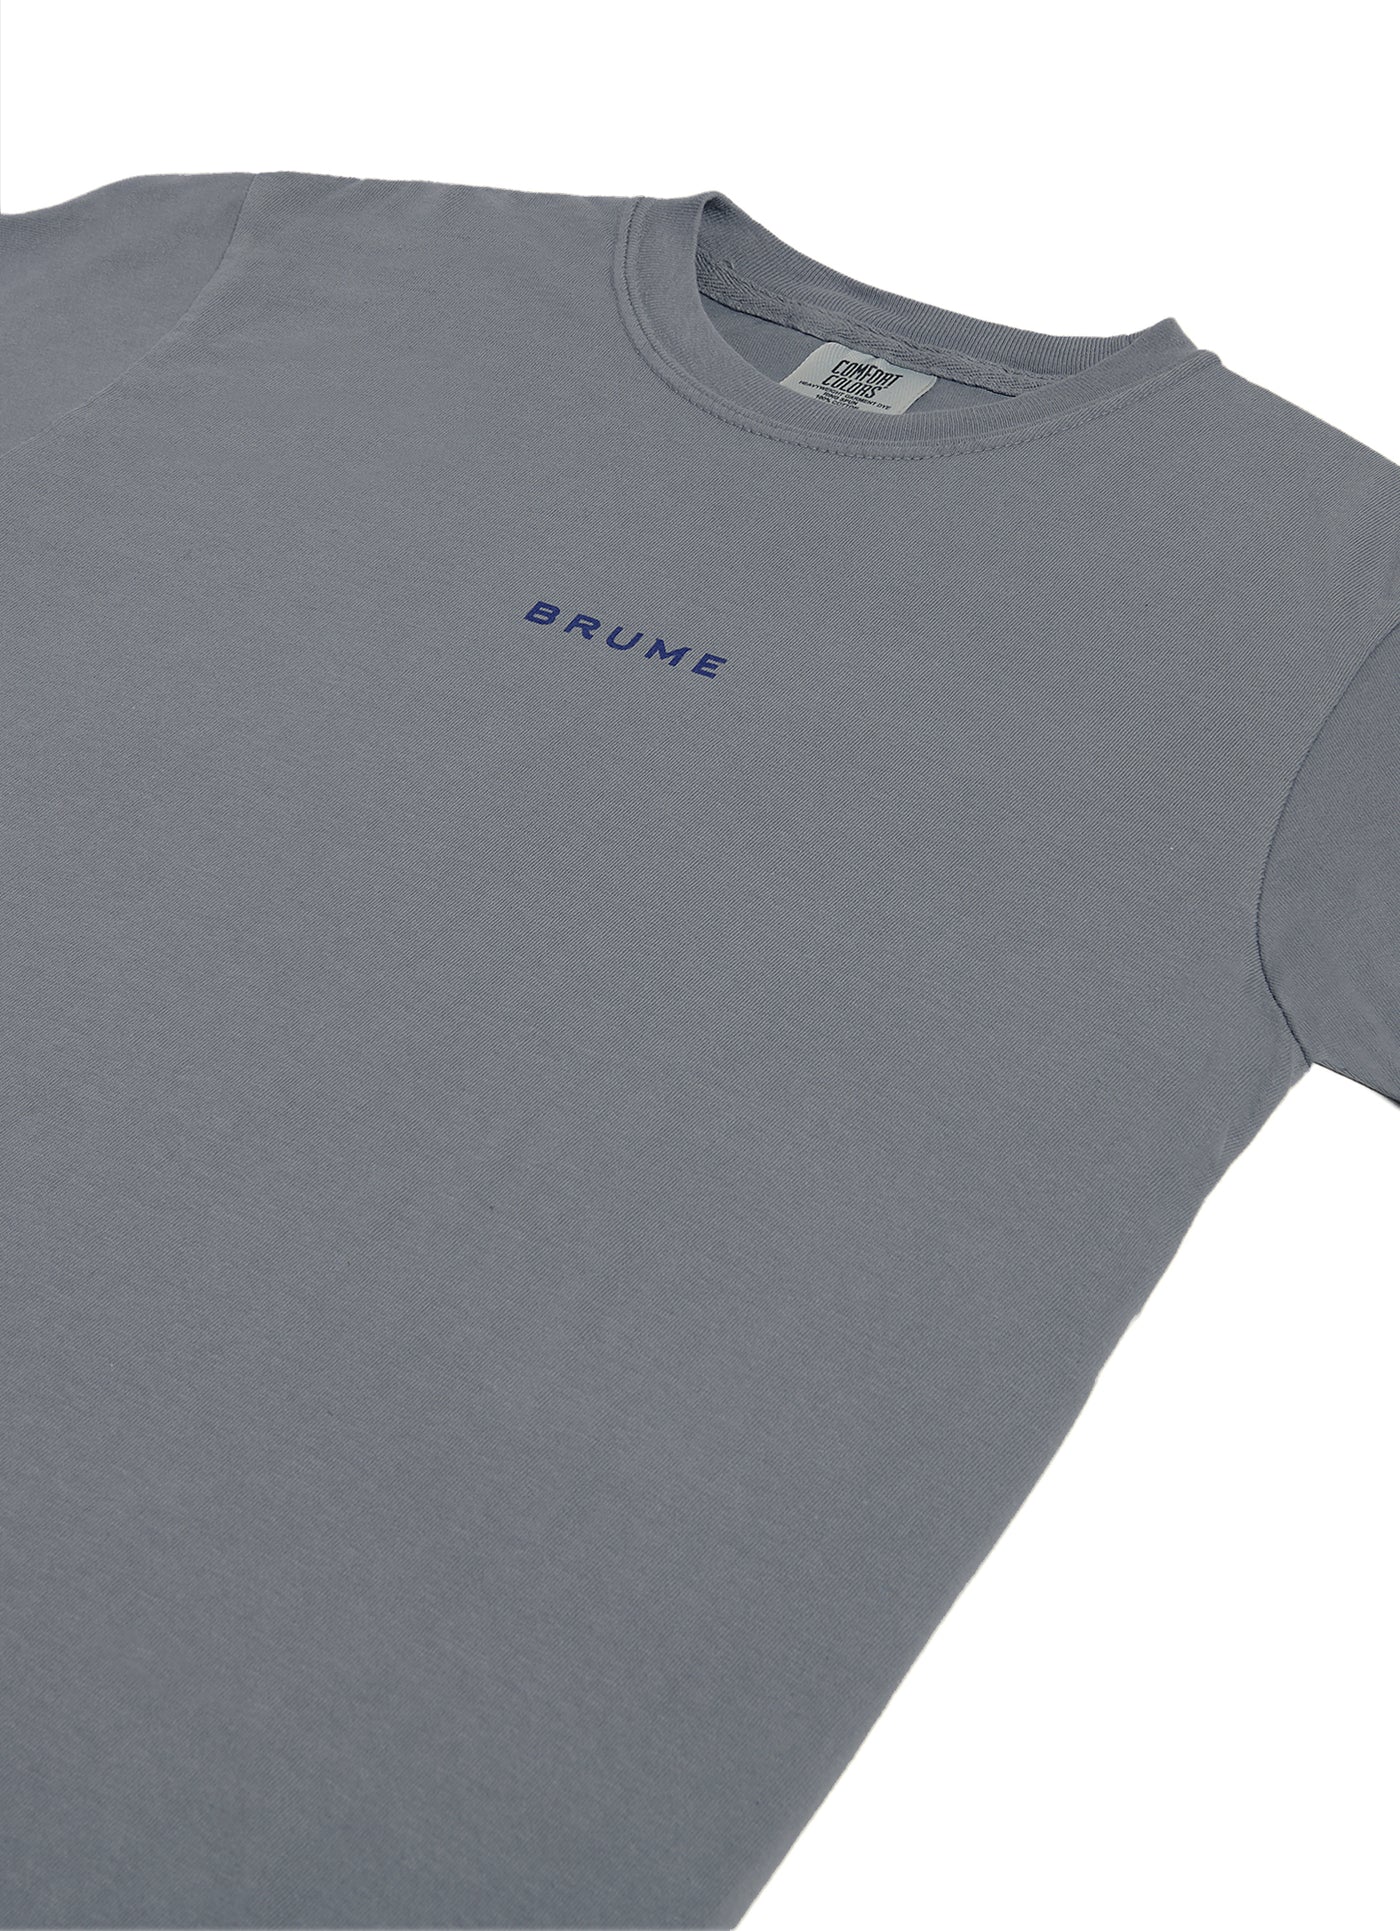 Surf T-Shirt — Limited Edition